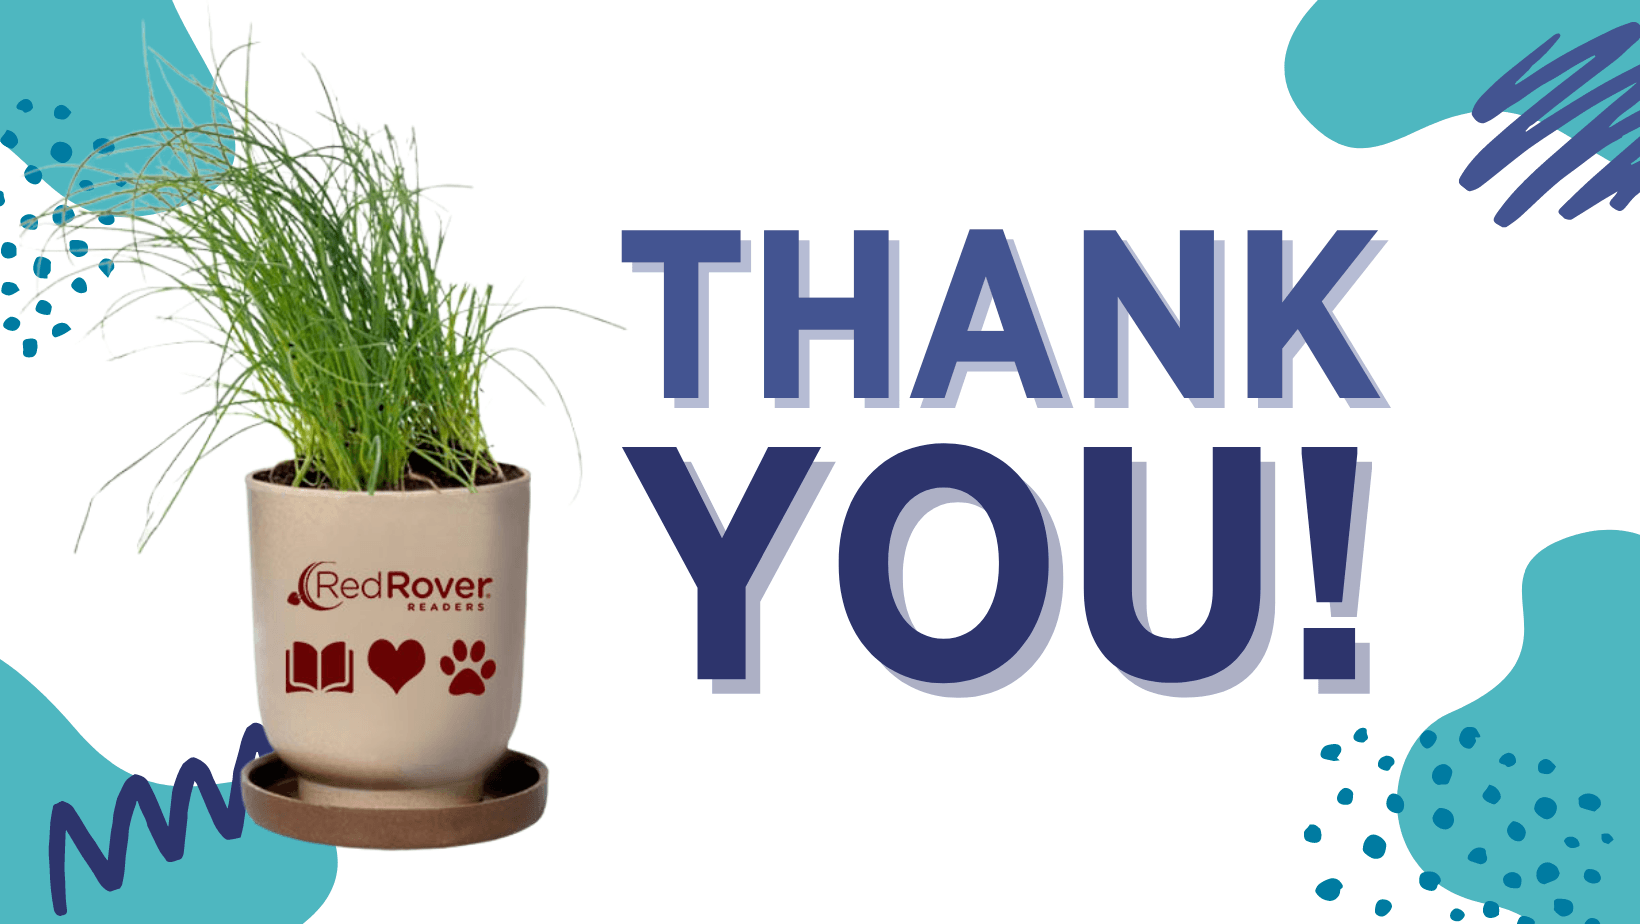 Thank you! Photo of RedRover Readers eco pot with chives growing